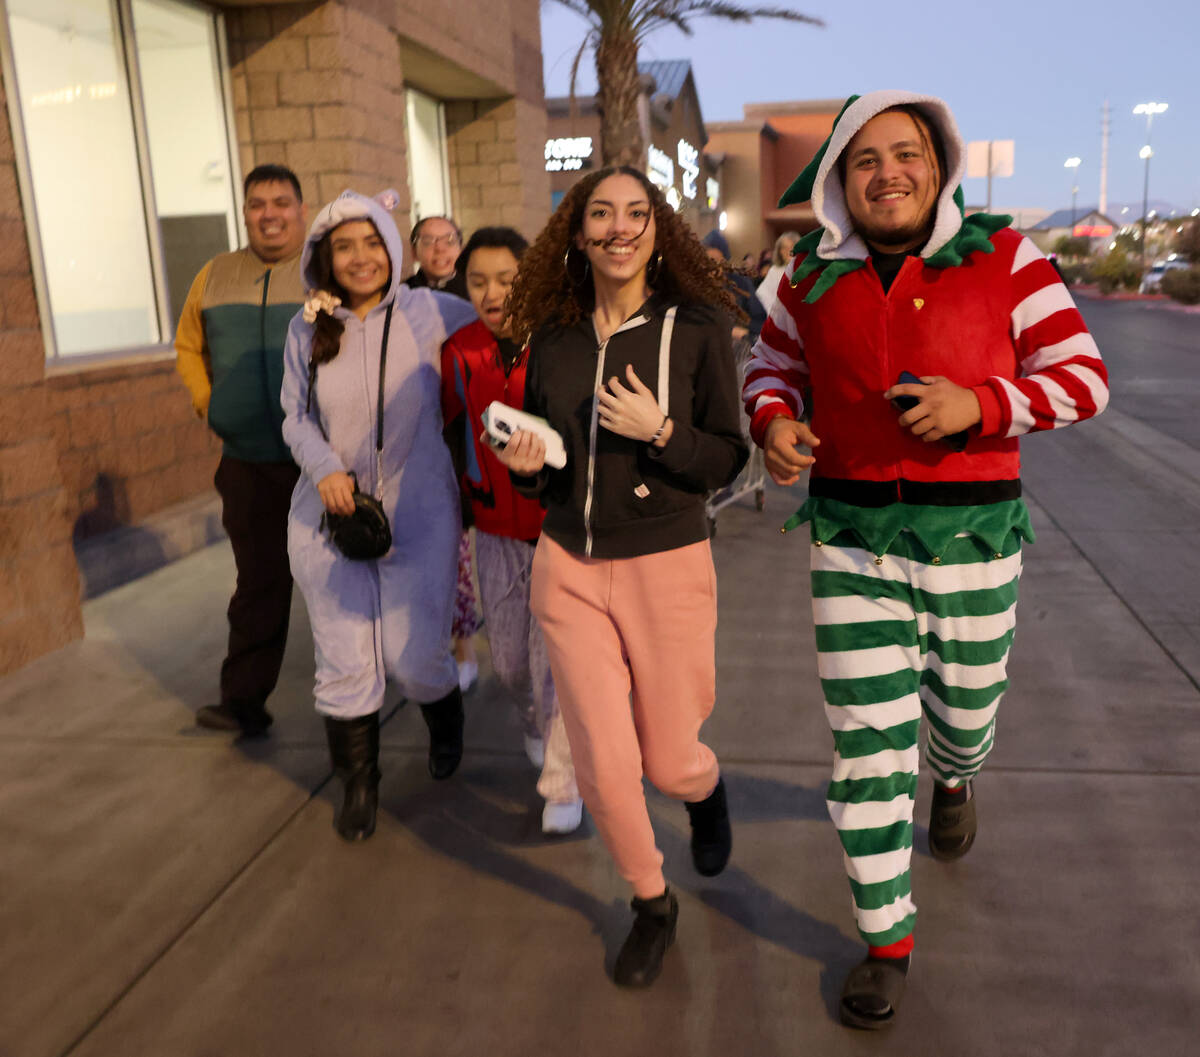 Black Friday in Las Vegas: Shoppers descend on stores for deals